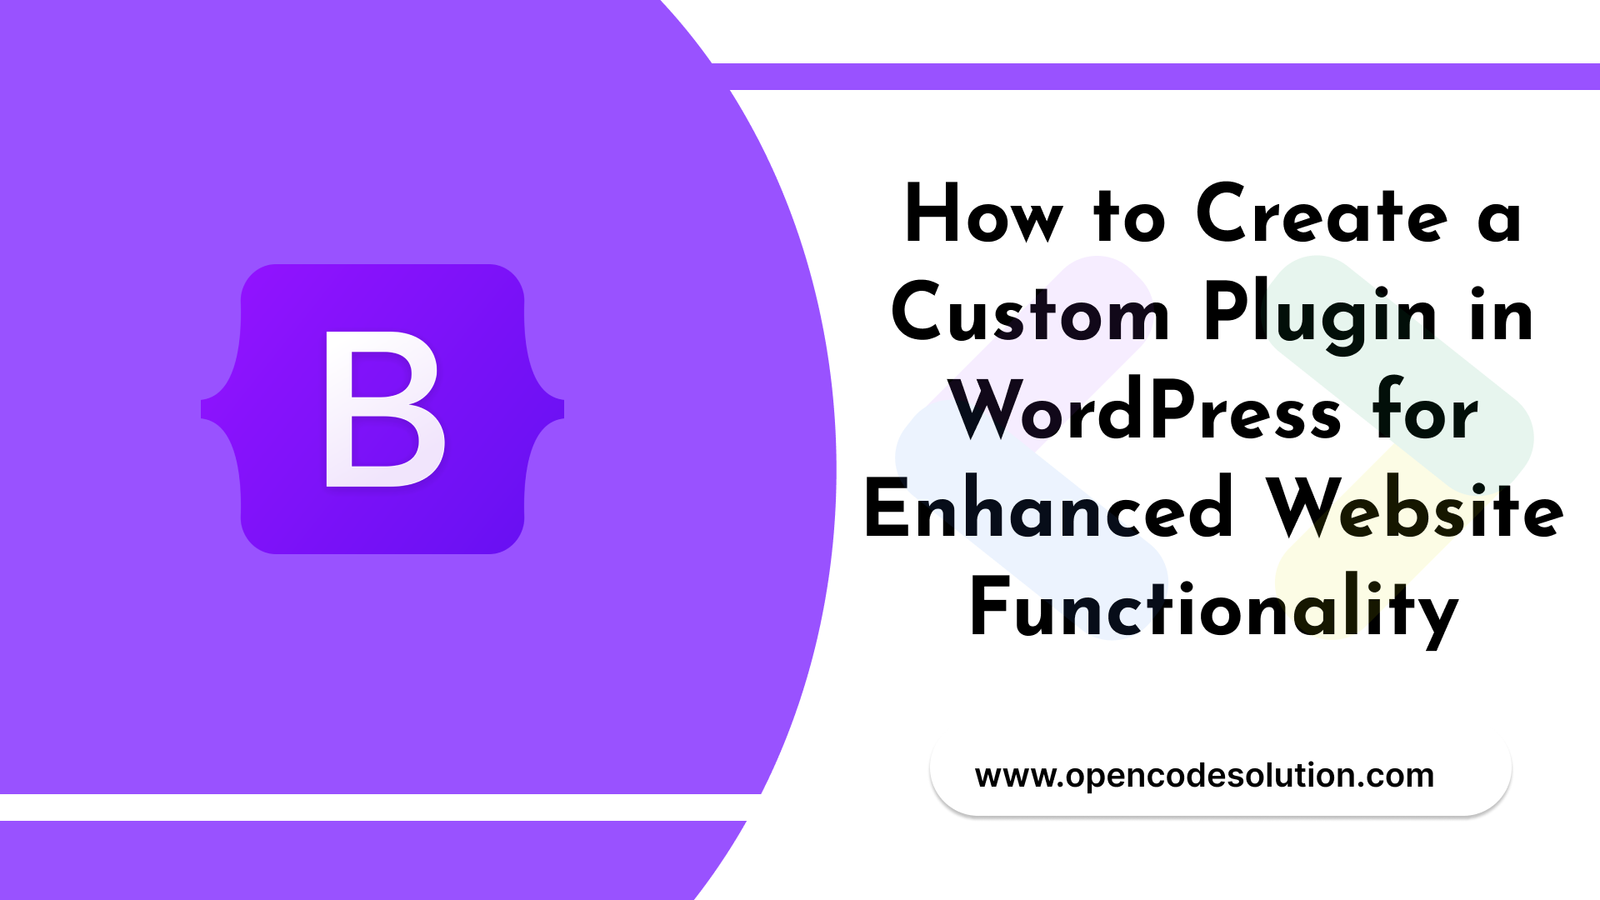 How to Create a Custom Plugin in WordPress for Enhanced Website Functionality